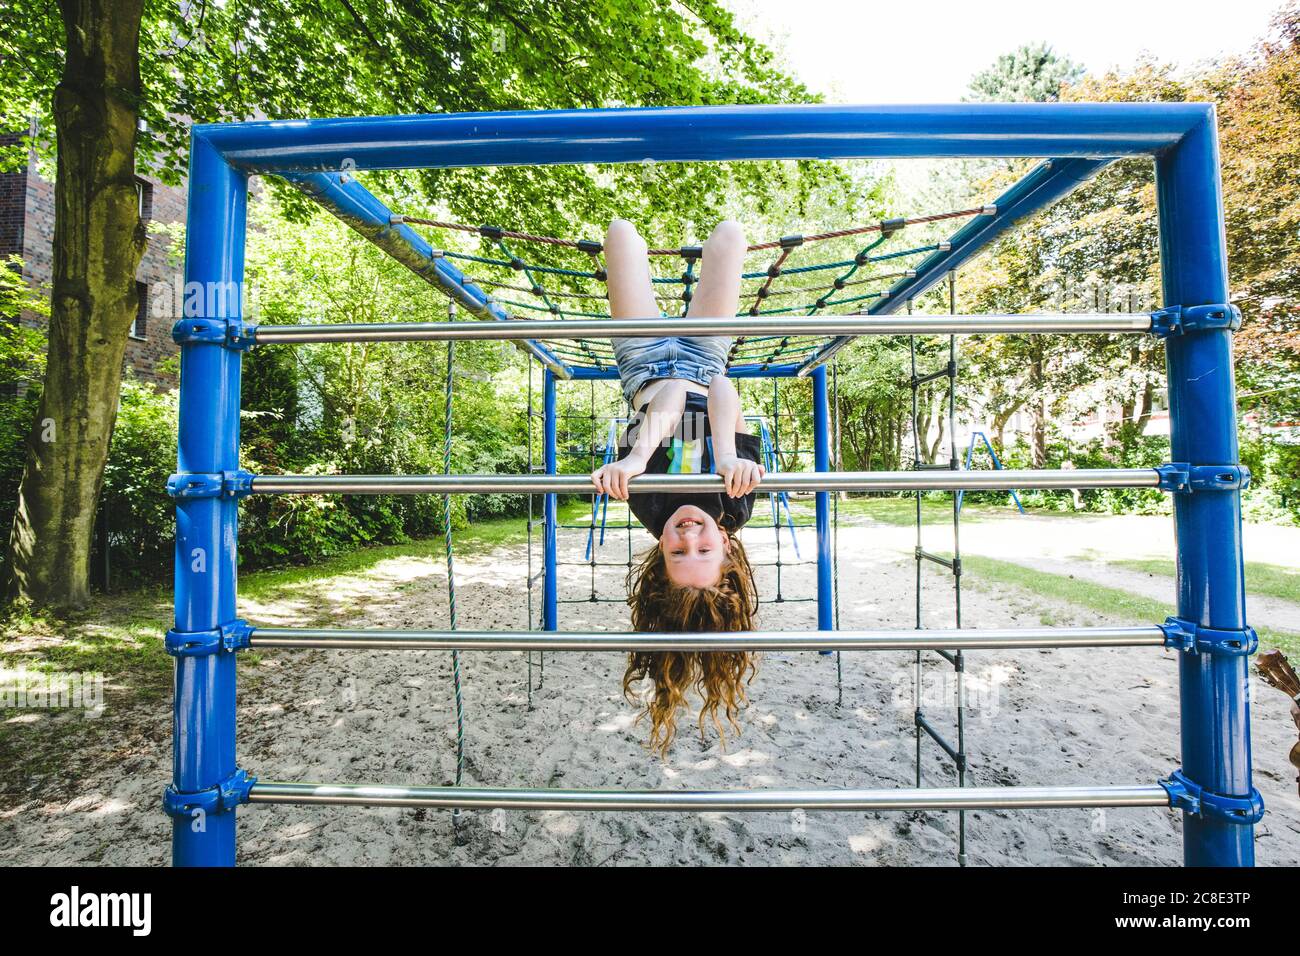 Smiling girl hanging upside down on jungle gym in playground at park Stock Photo